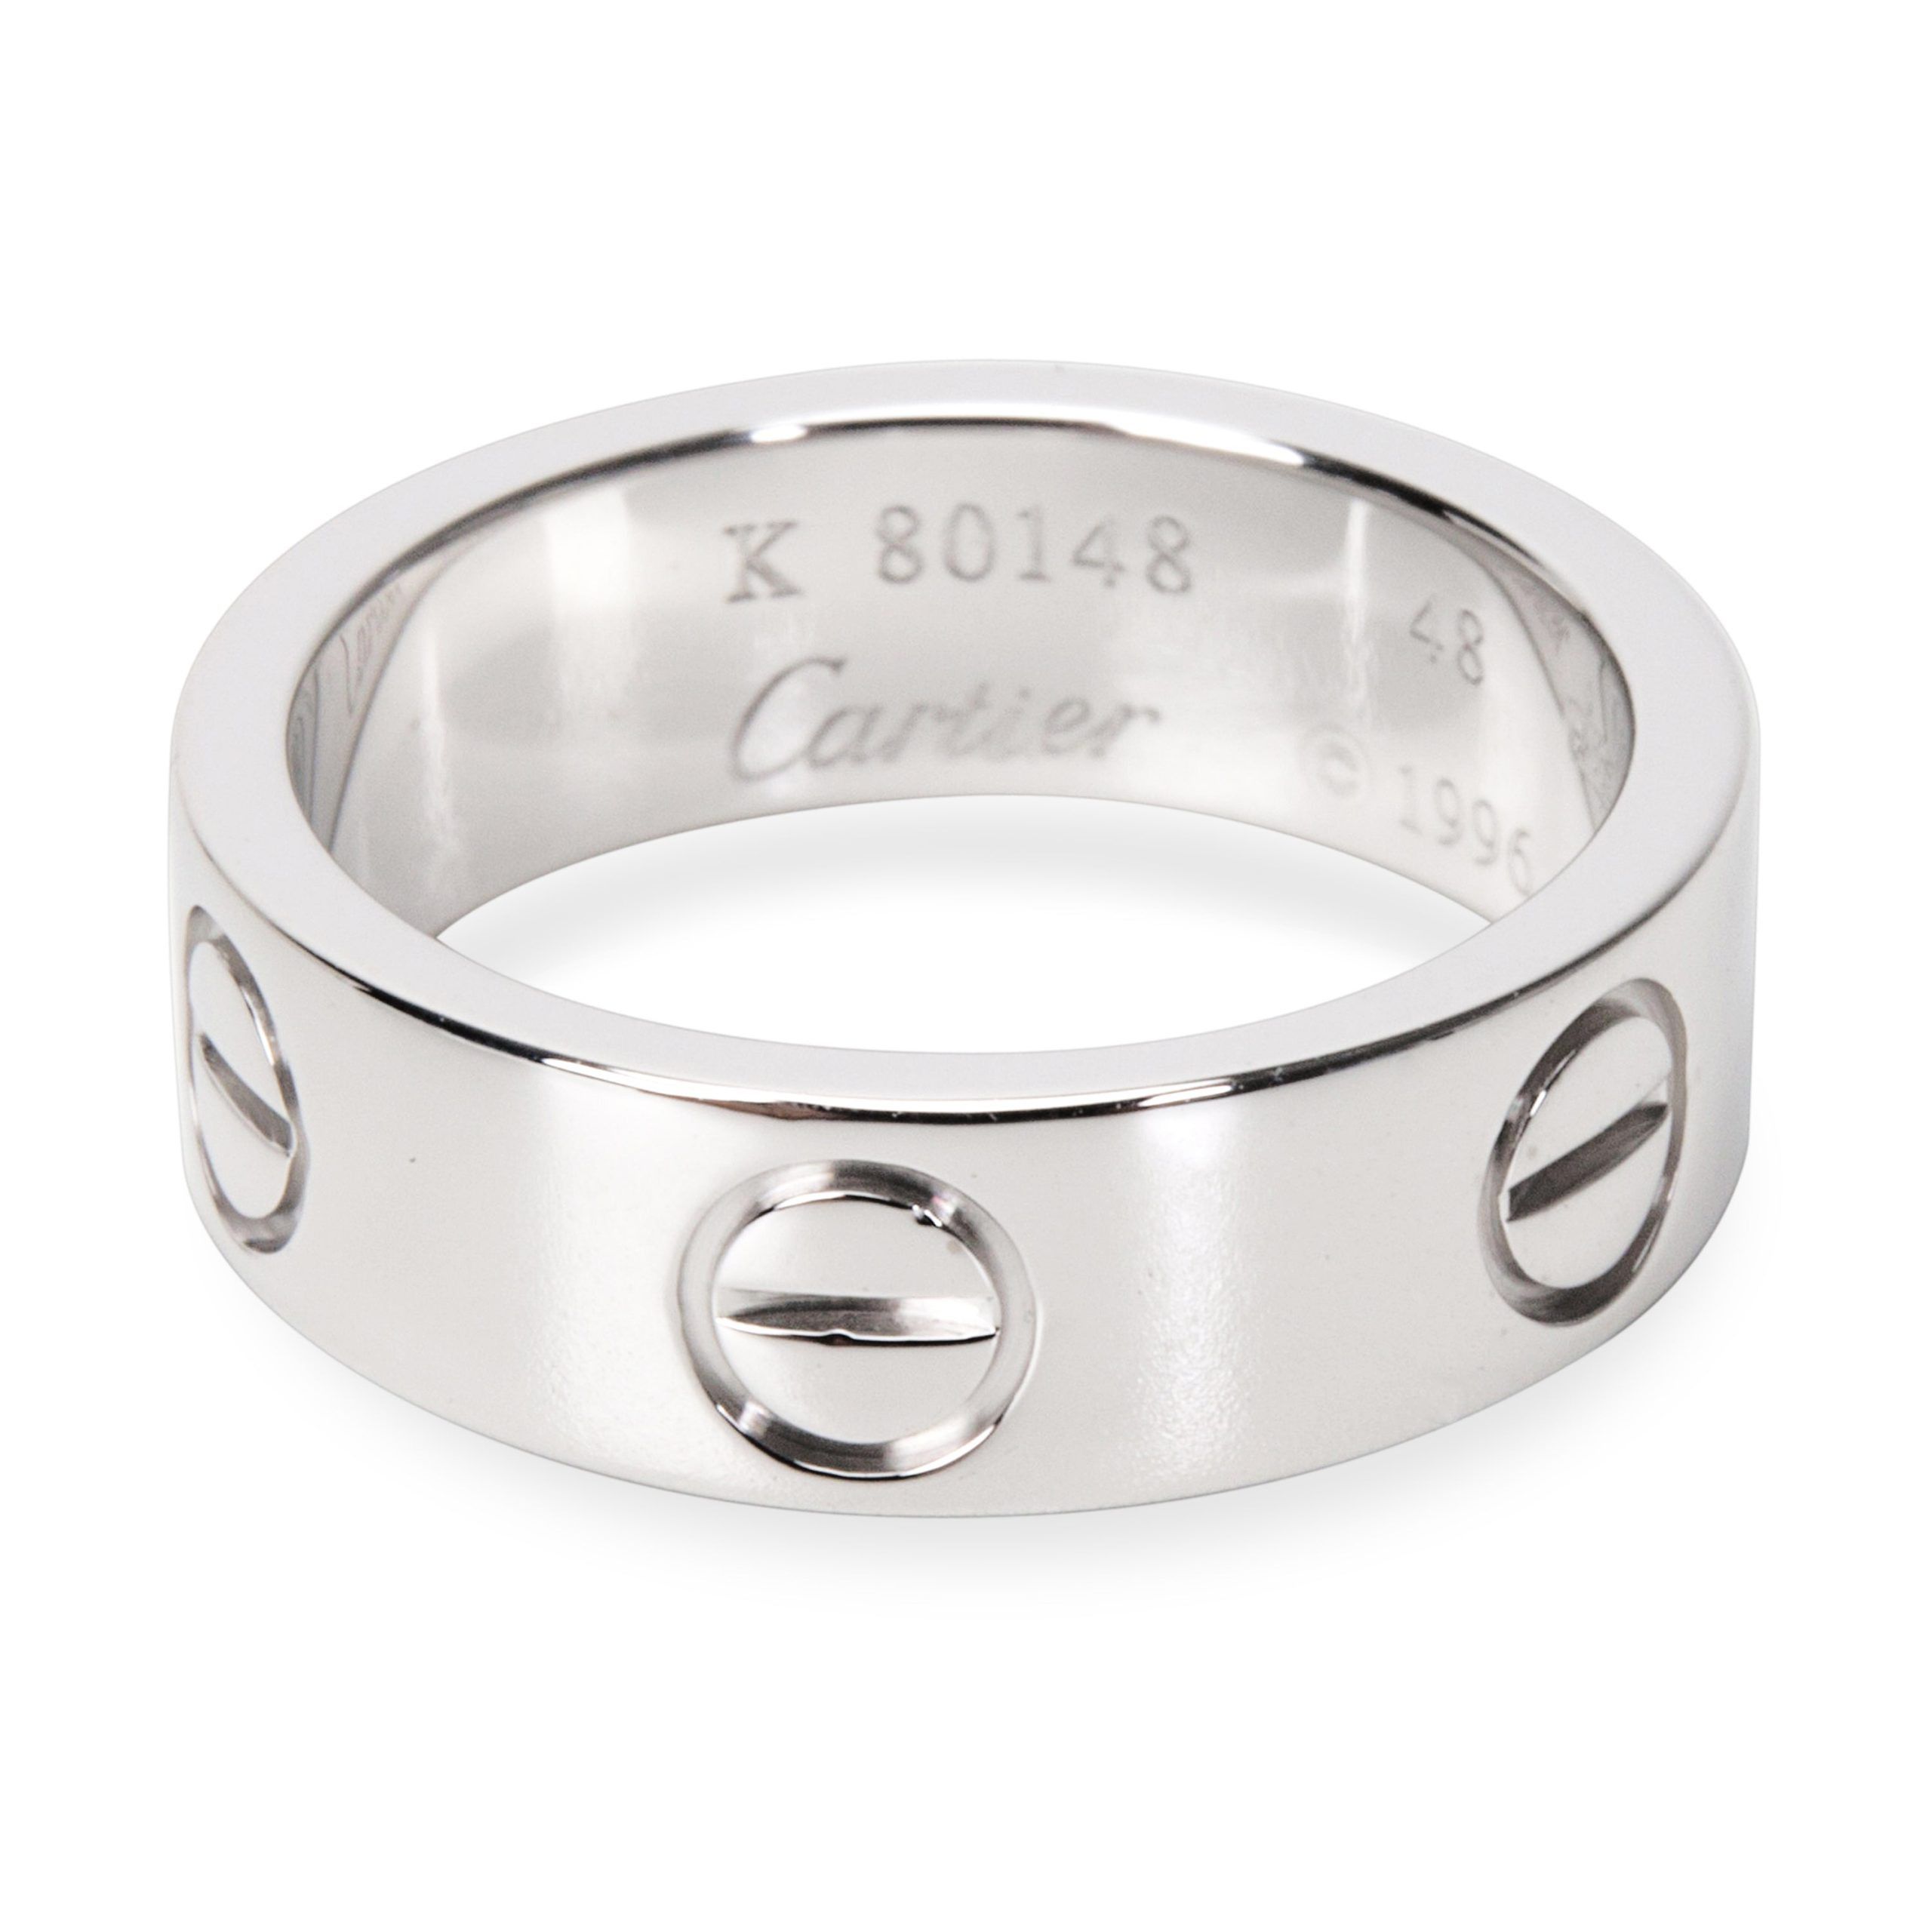 image of Cartier Love Band 18K White Gold, Women's